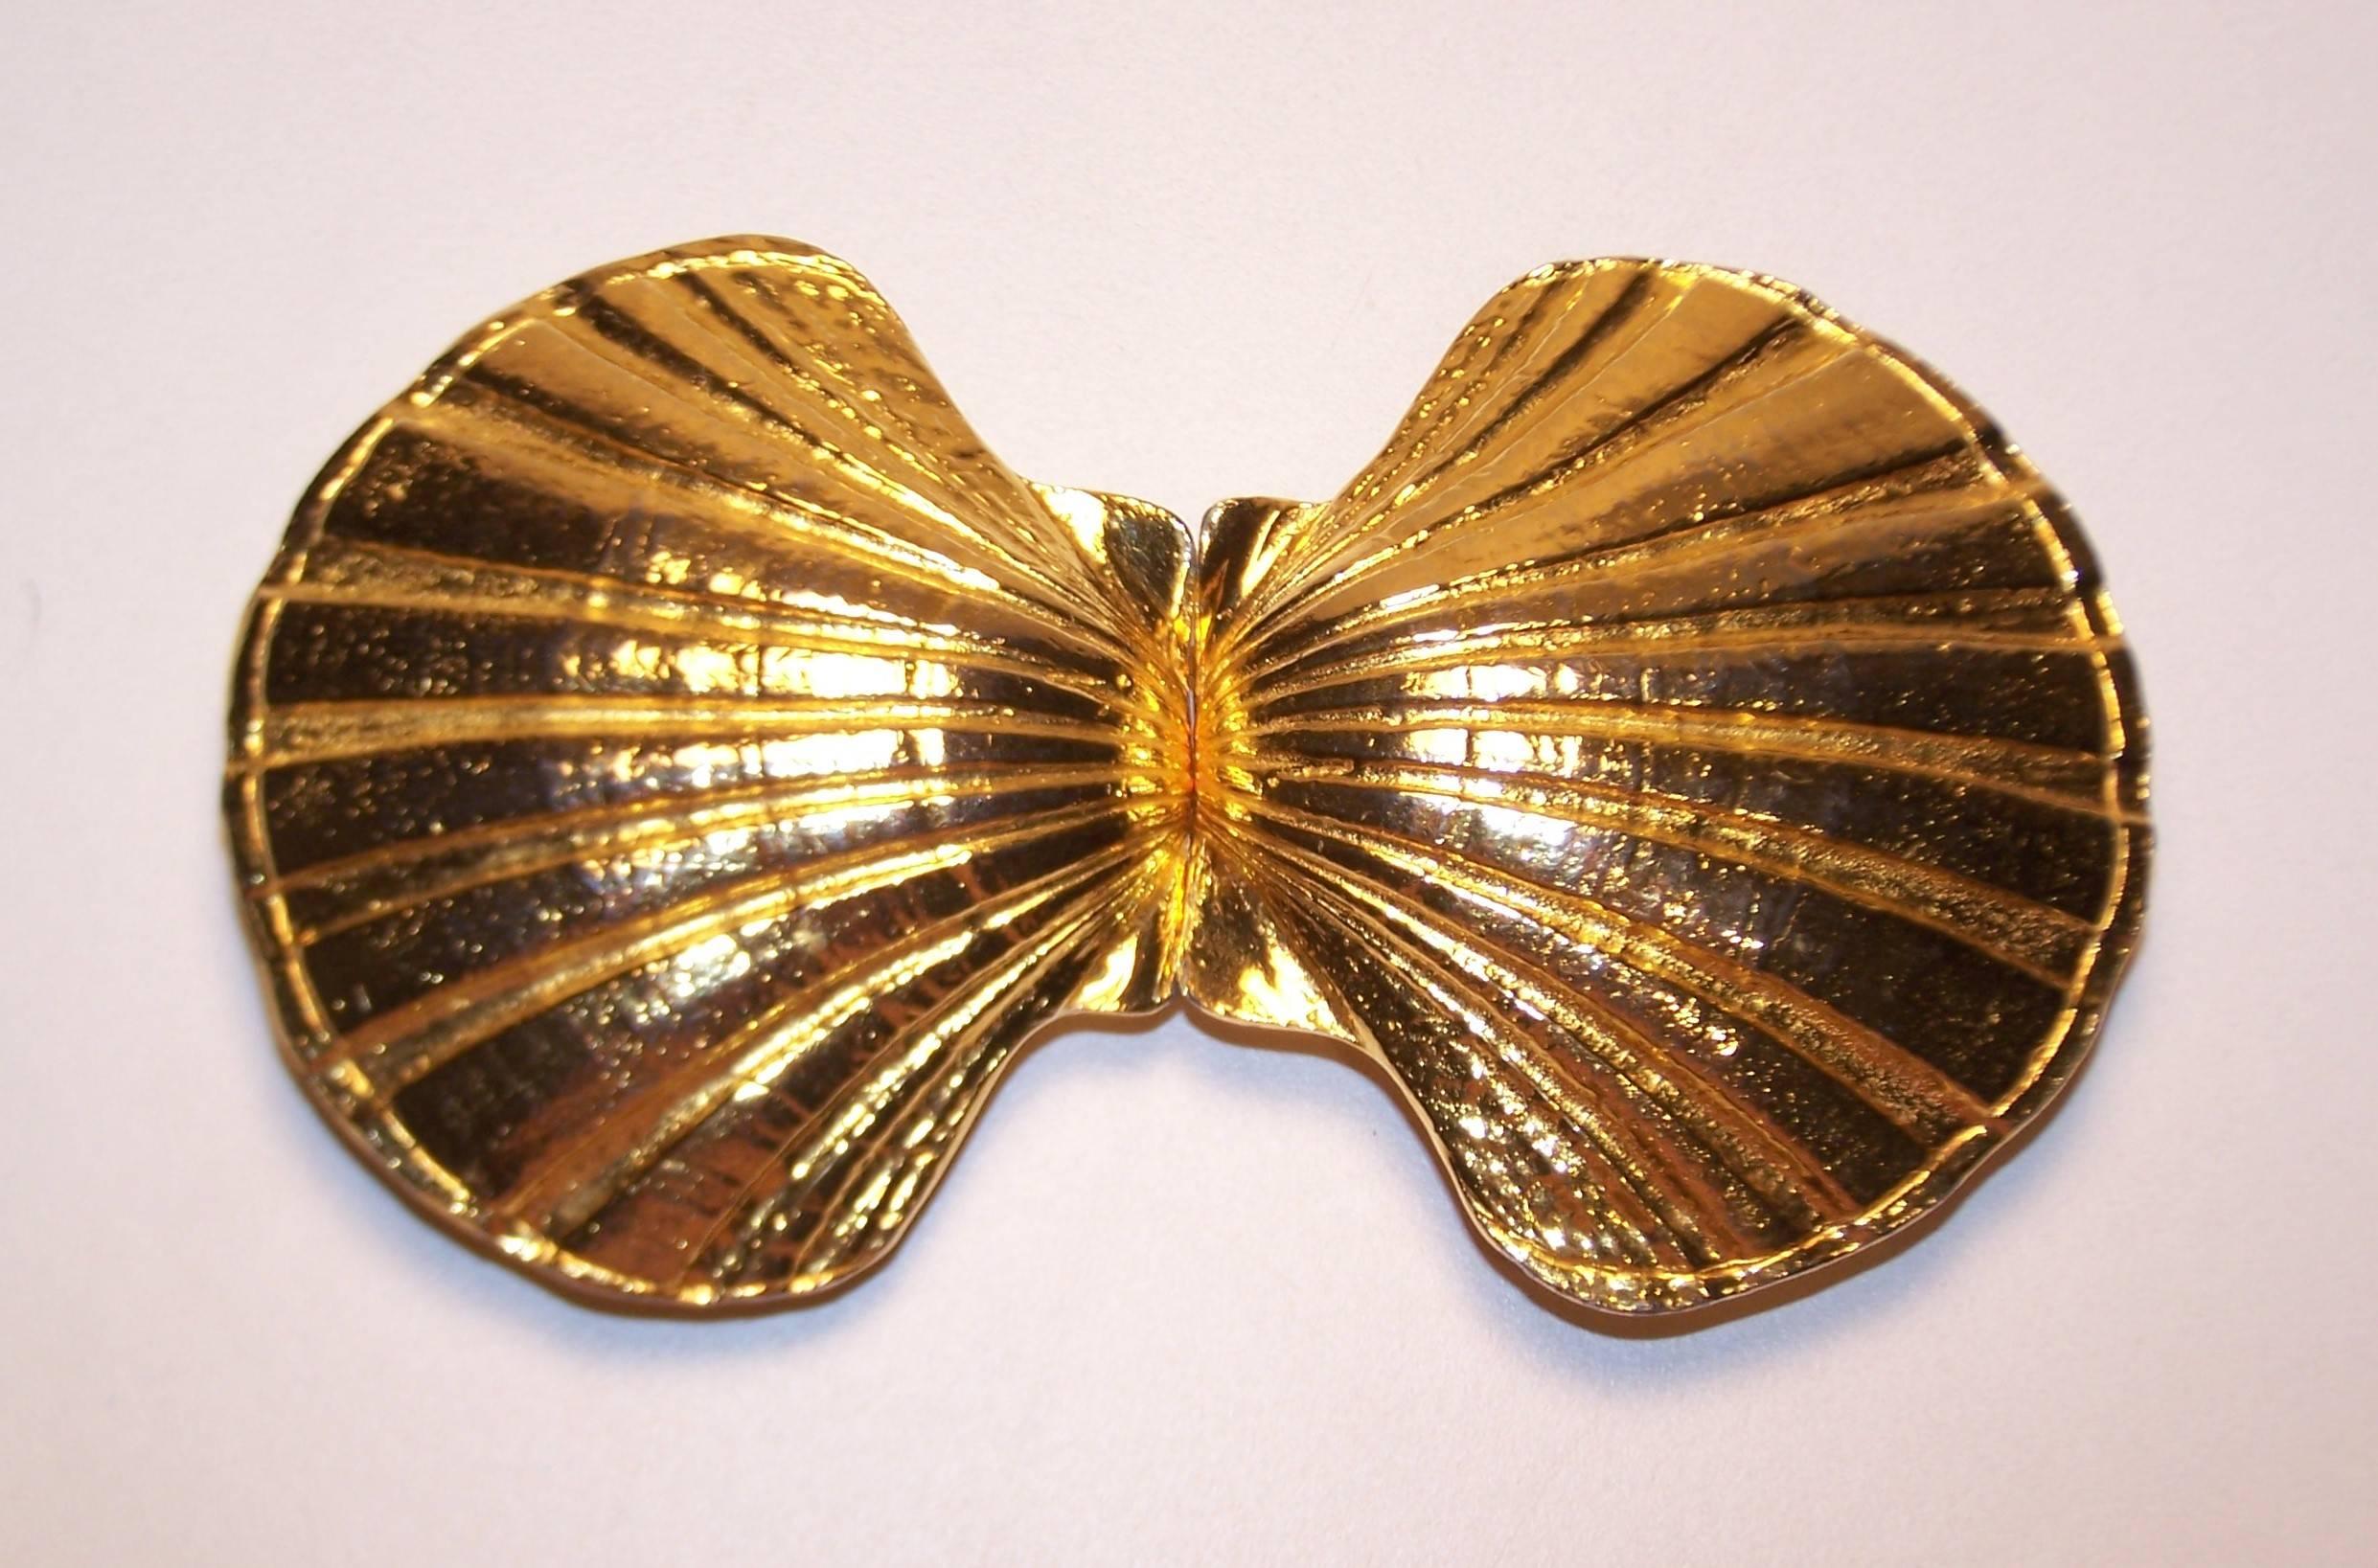 Mimi di Niscemi started her career as a jewelry designer both working for the manufacturer that produced Schiaparelli designs as well as Arnold Scaasi.  Her famous belt buckles were designed to mix and match with various color strips allowing for